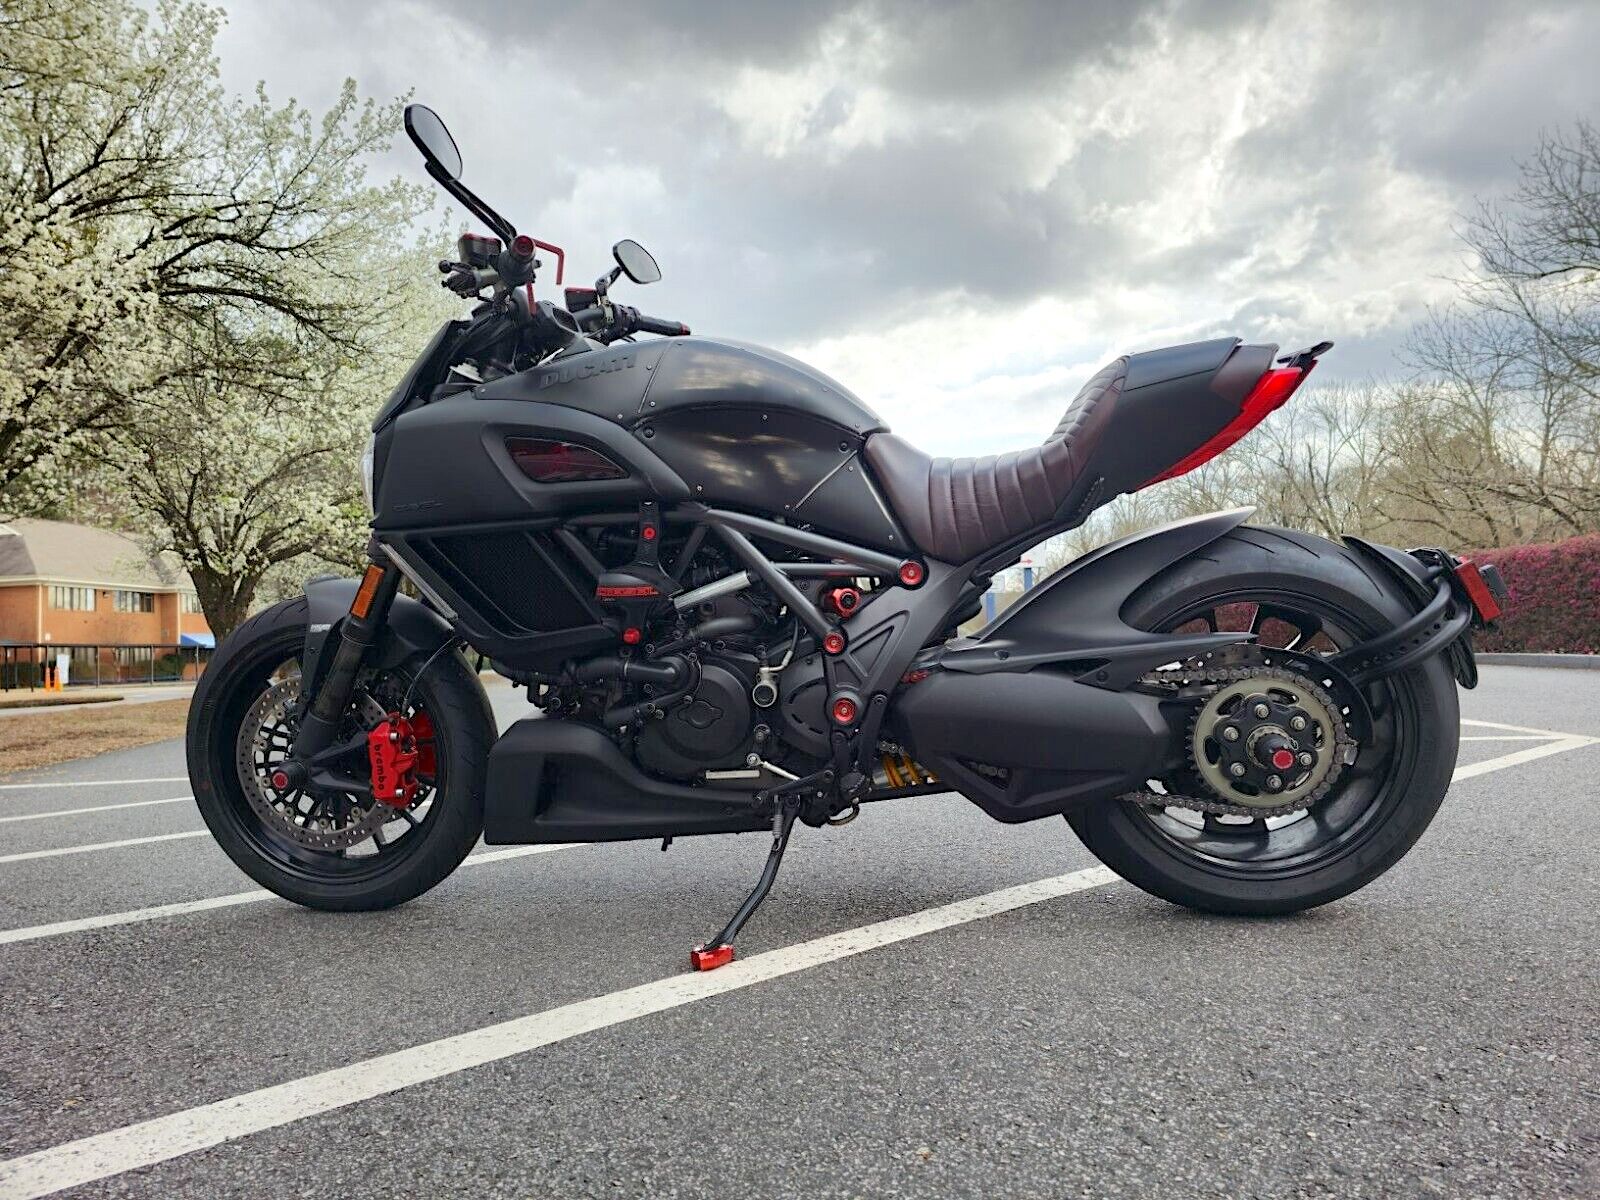 Motorcycle review: Ducati's Diavel has devilish side